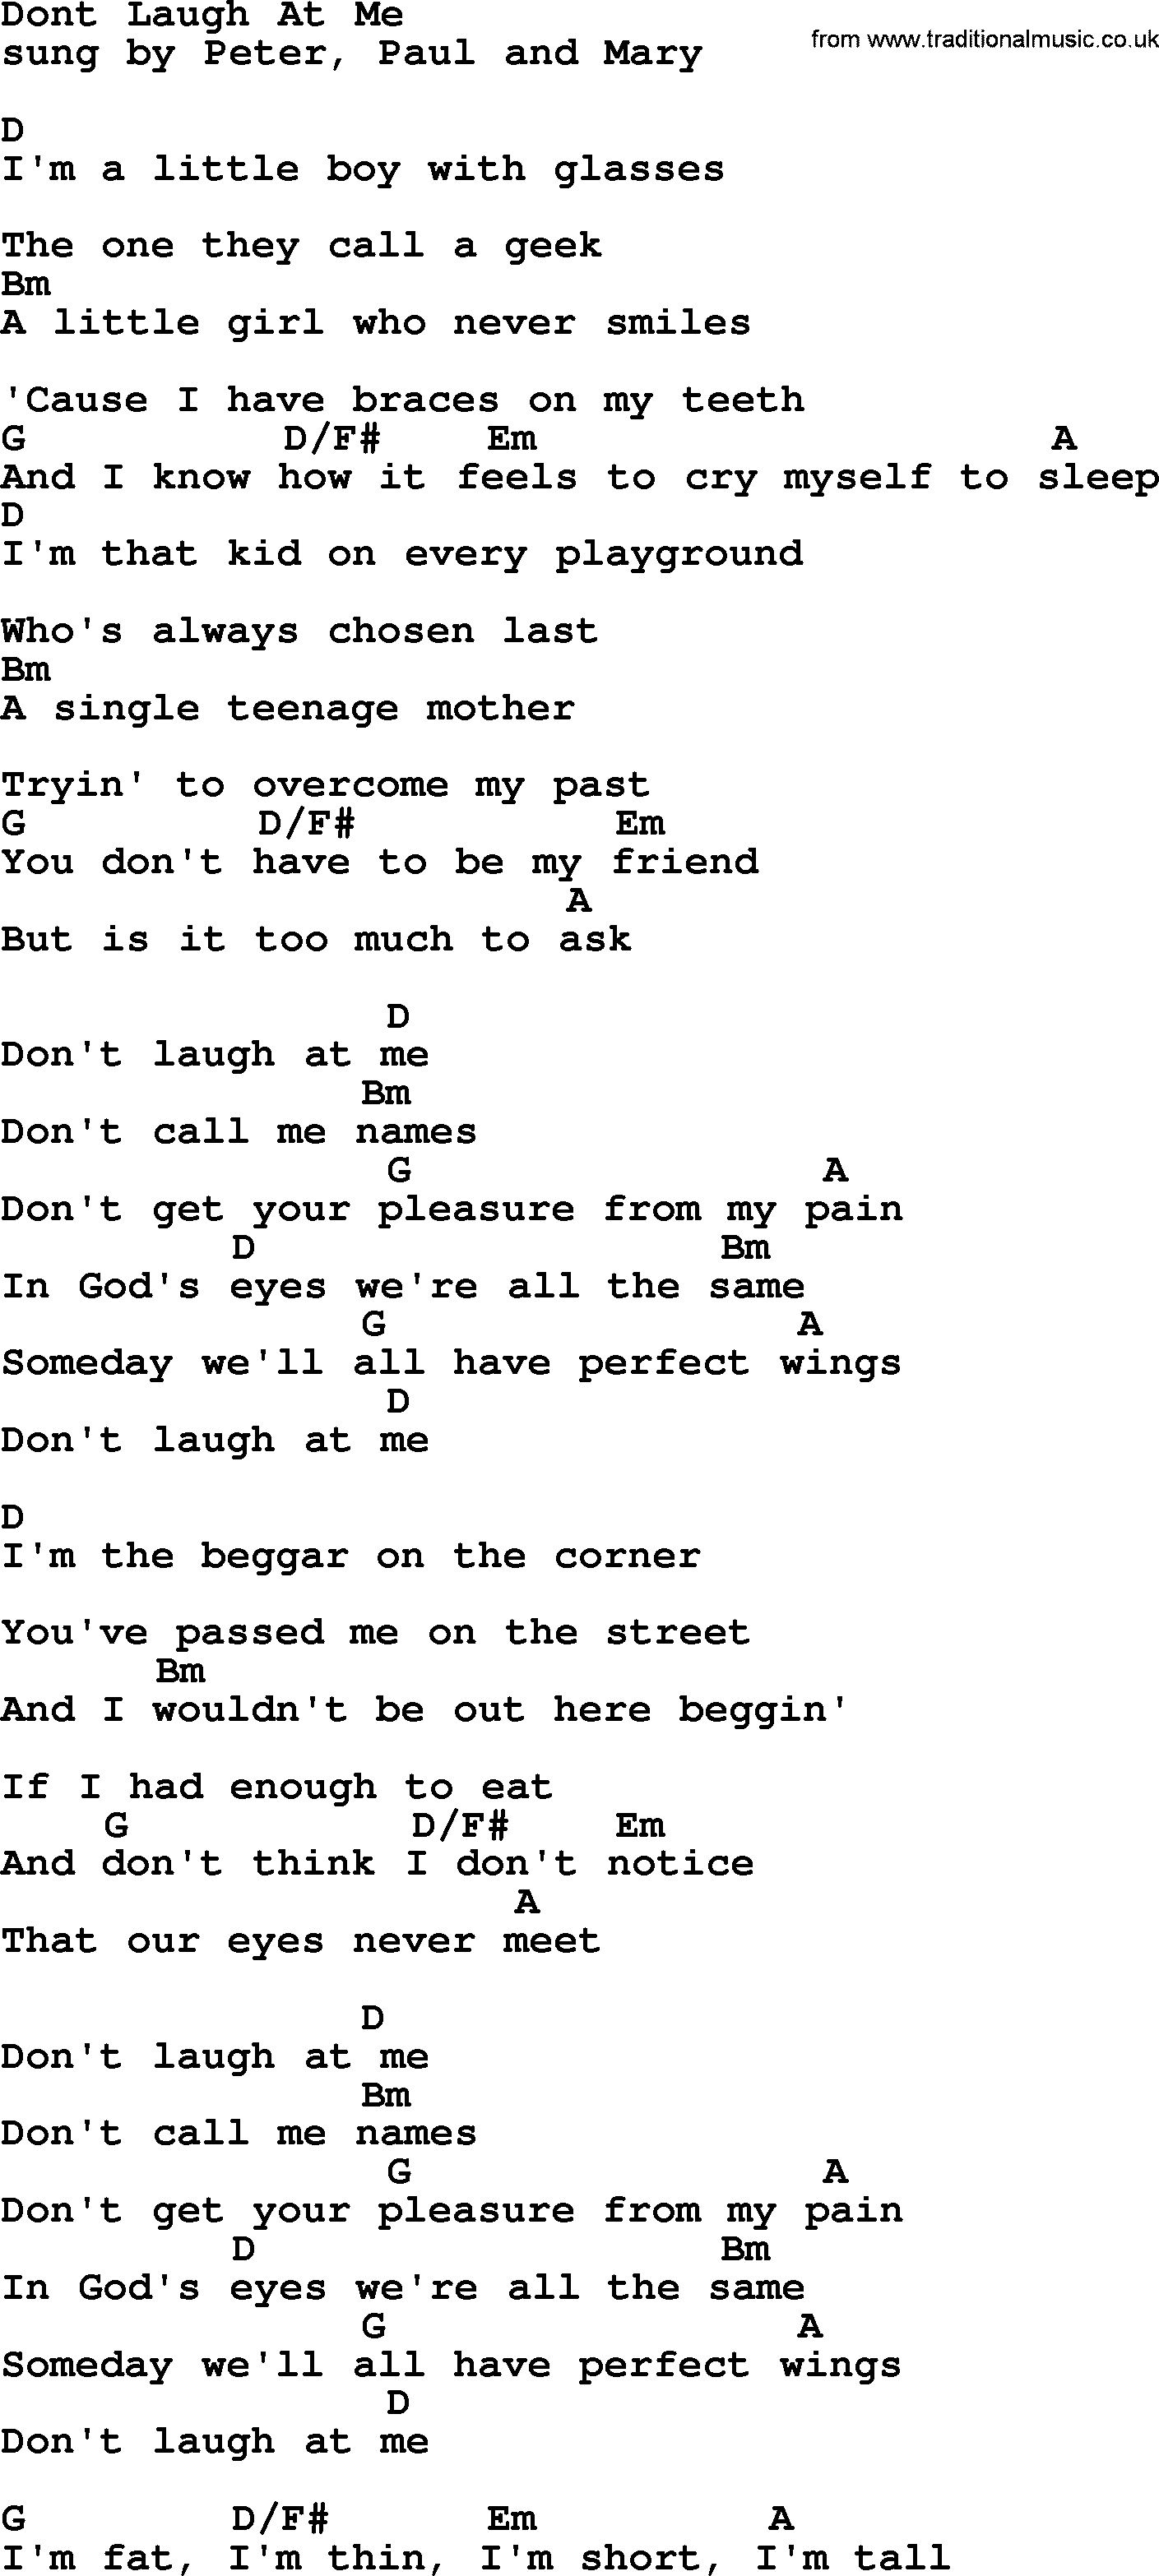 Peter, Paul and Mary song Dont Laugh At Me, lyrics and chords